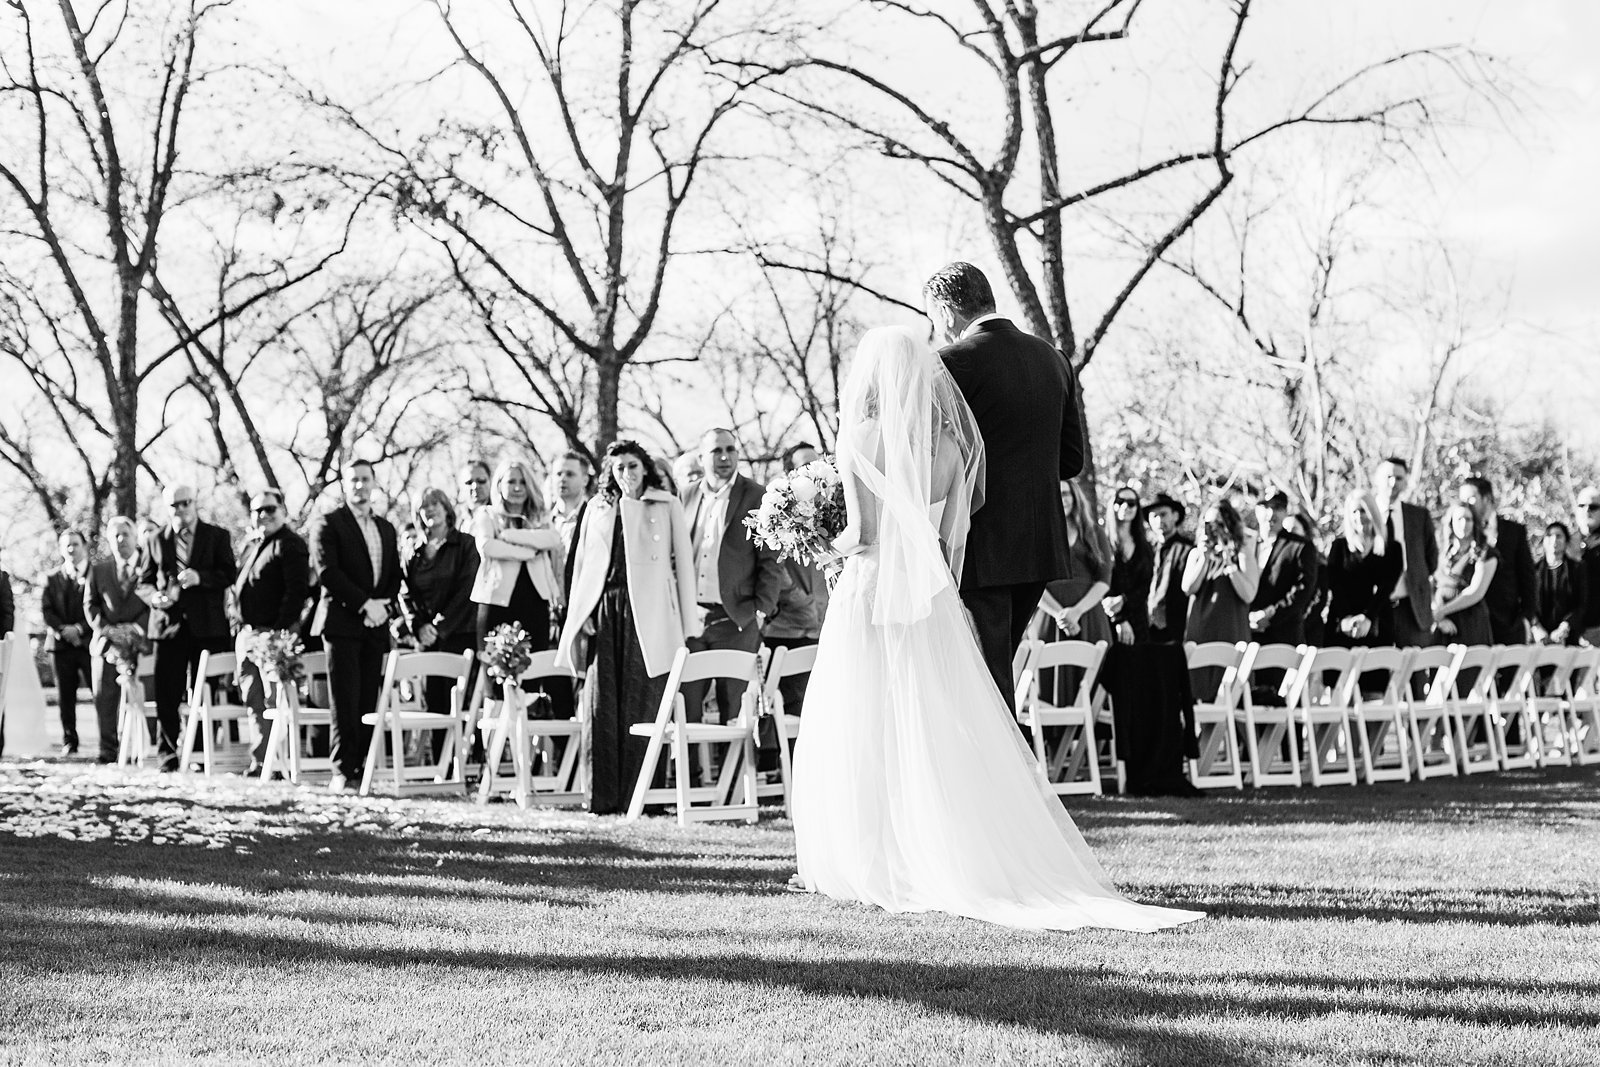 Bride walking down aisle during Venue At The Grove wedding ceremony by Arizona wedding photographer PMA Photography.